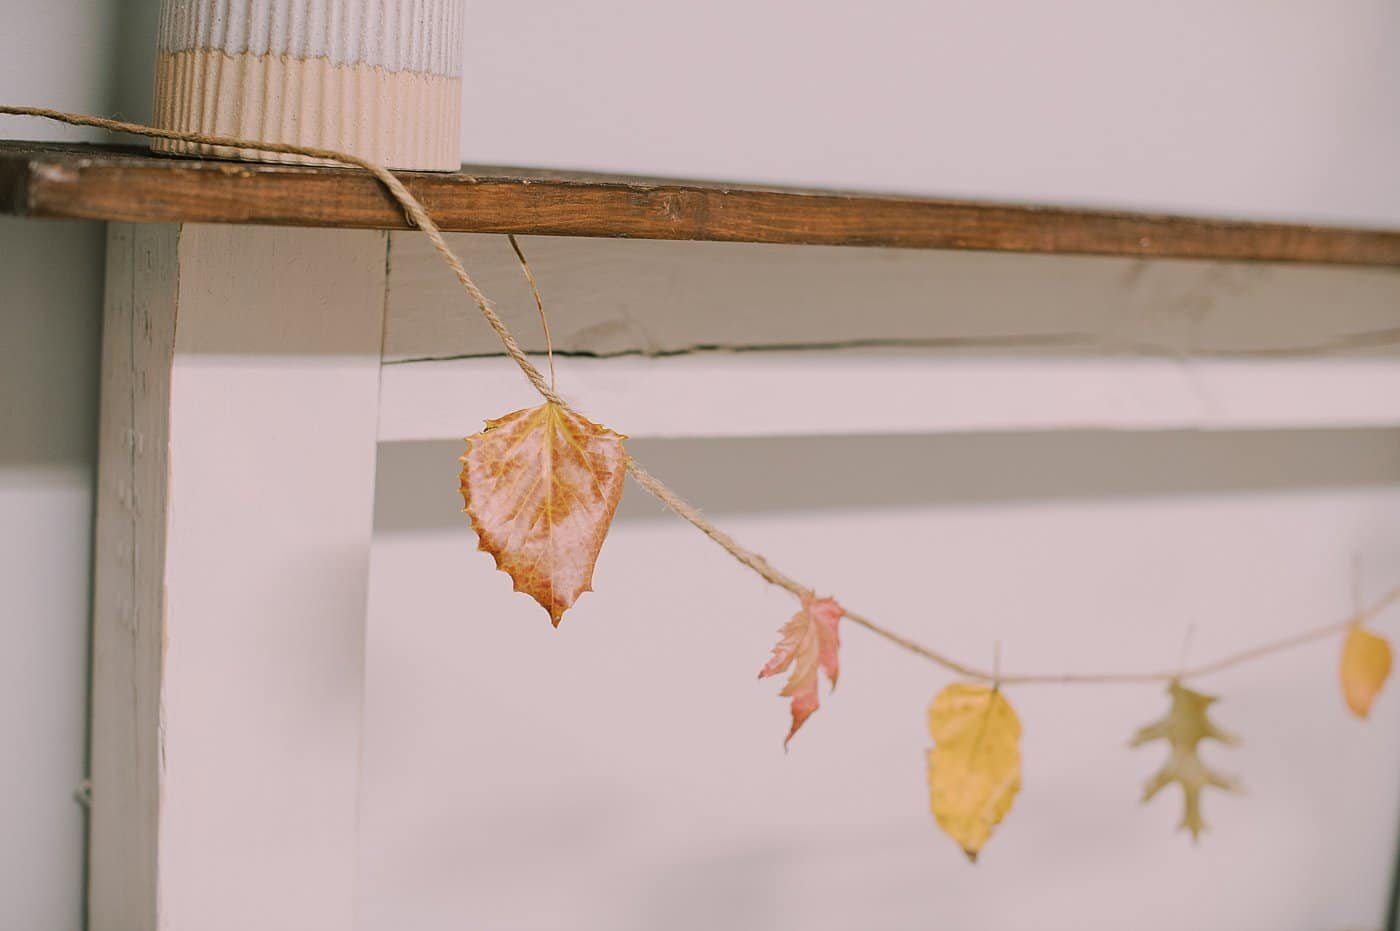 Wax coated leaves in a fall garland.